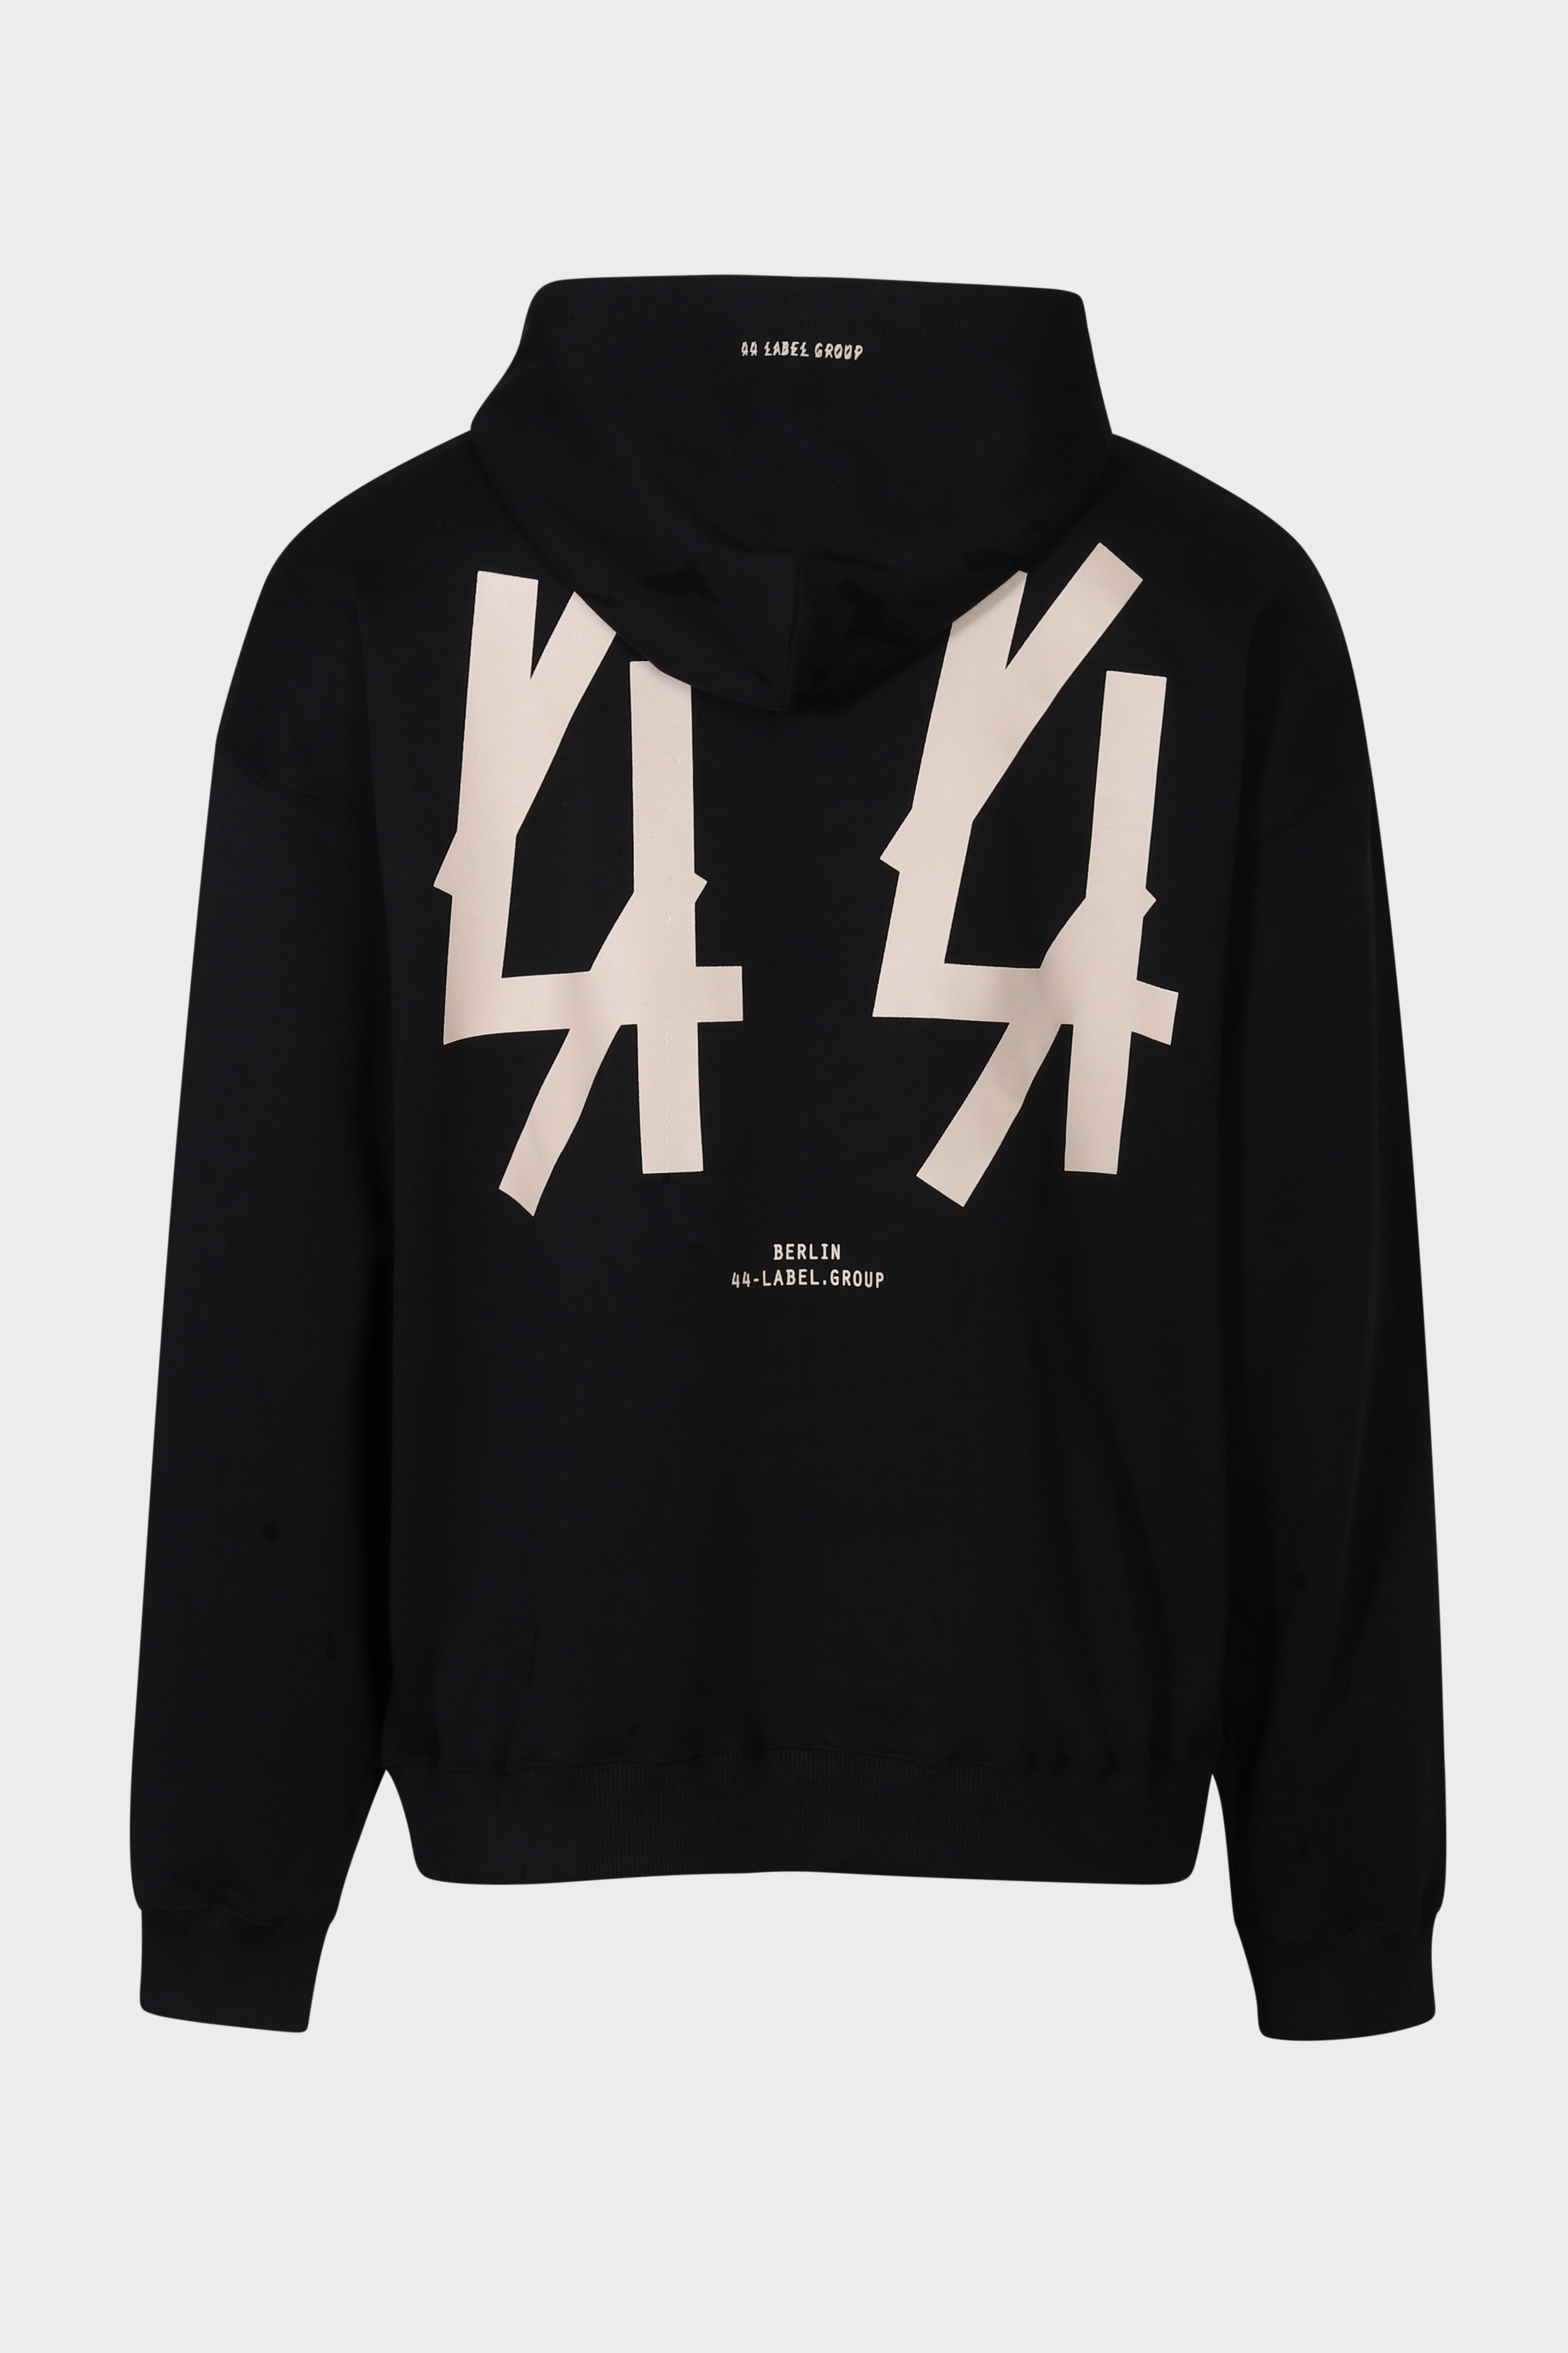 44 LABEL GROUP New Classic Hoodie in Black/Dirty White S